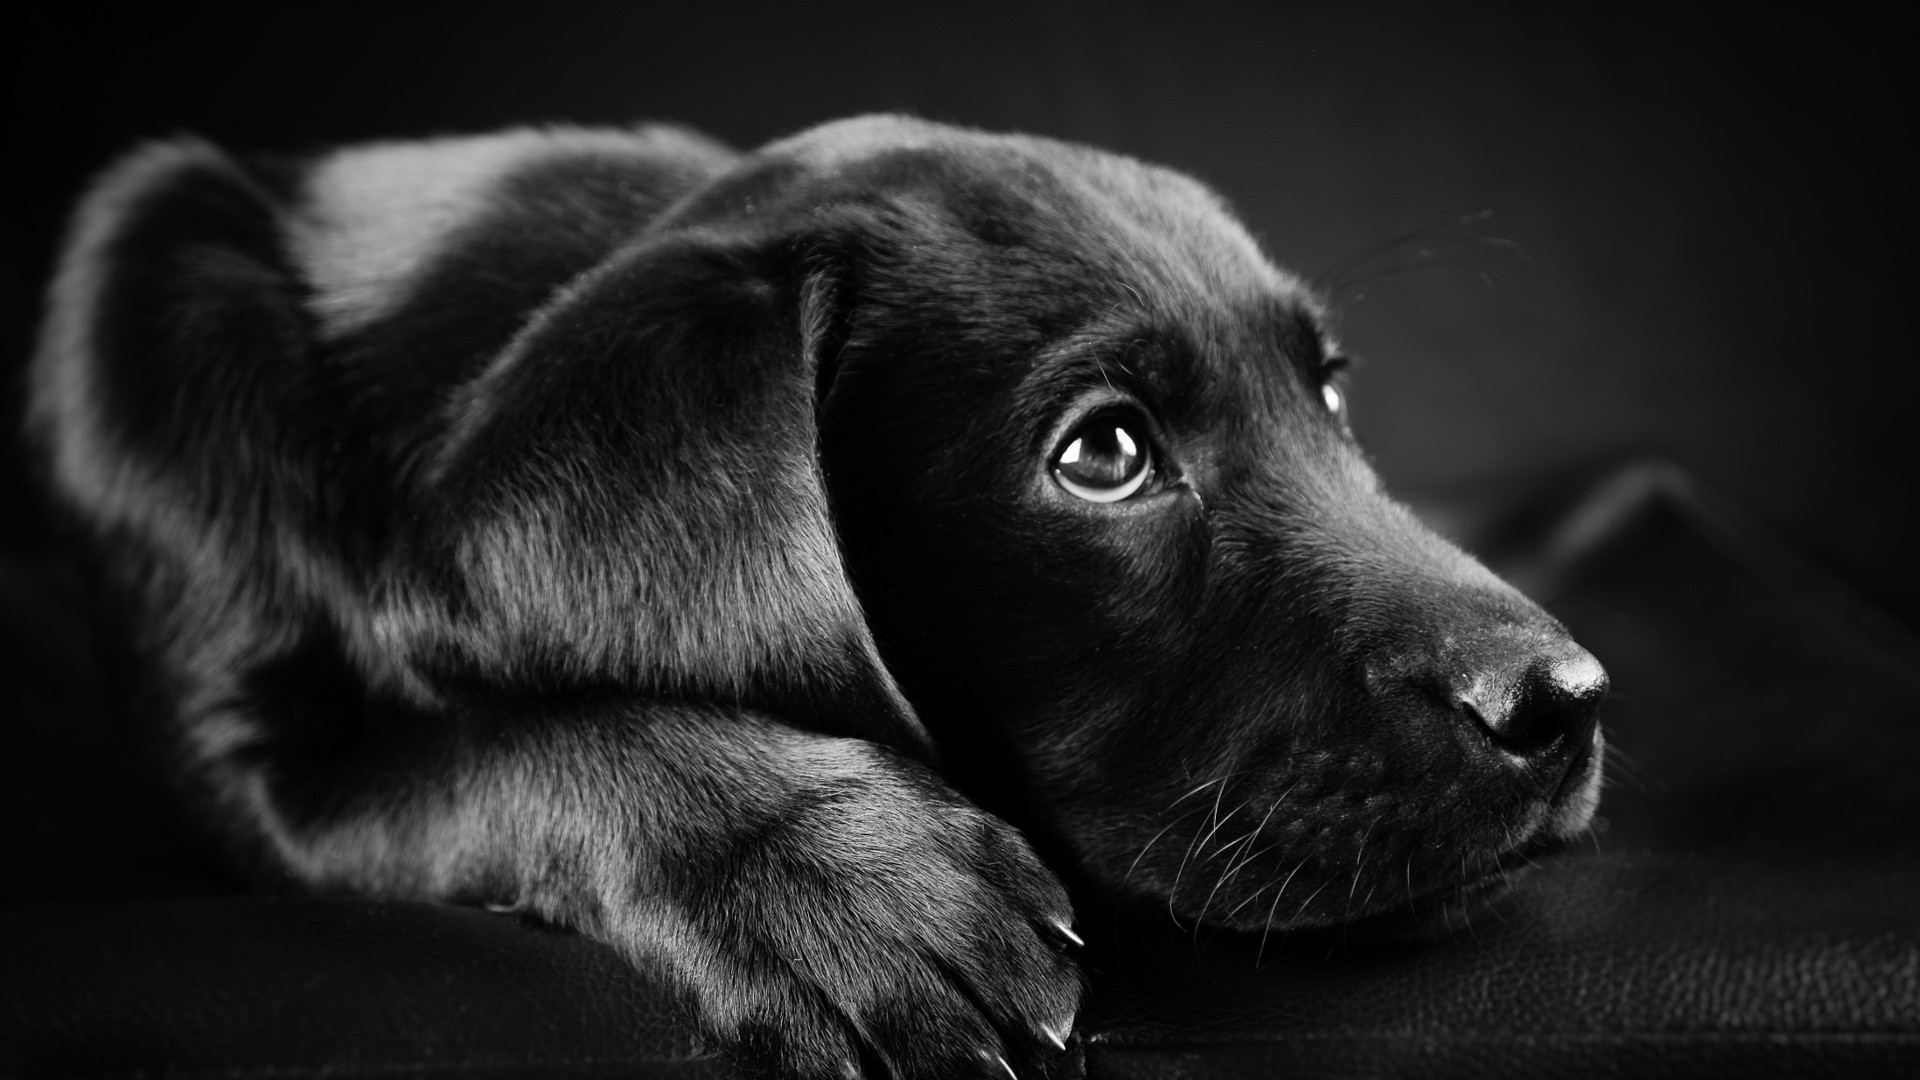 Wallpaper, face, animals, black background, closeup, nose, whiskers, puppies, Labrador Retriever, puppy, darkness, 1920x1080 px, black and white, monochrome photography, vertebrate, close up, snout, dog like mammal 1920x1080